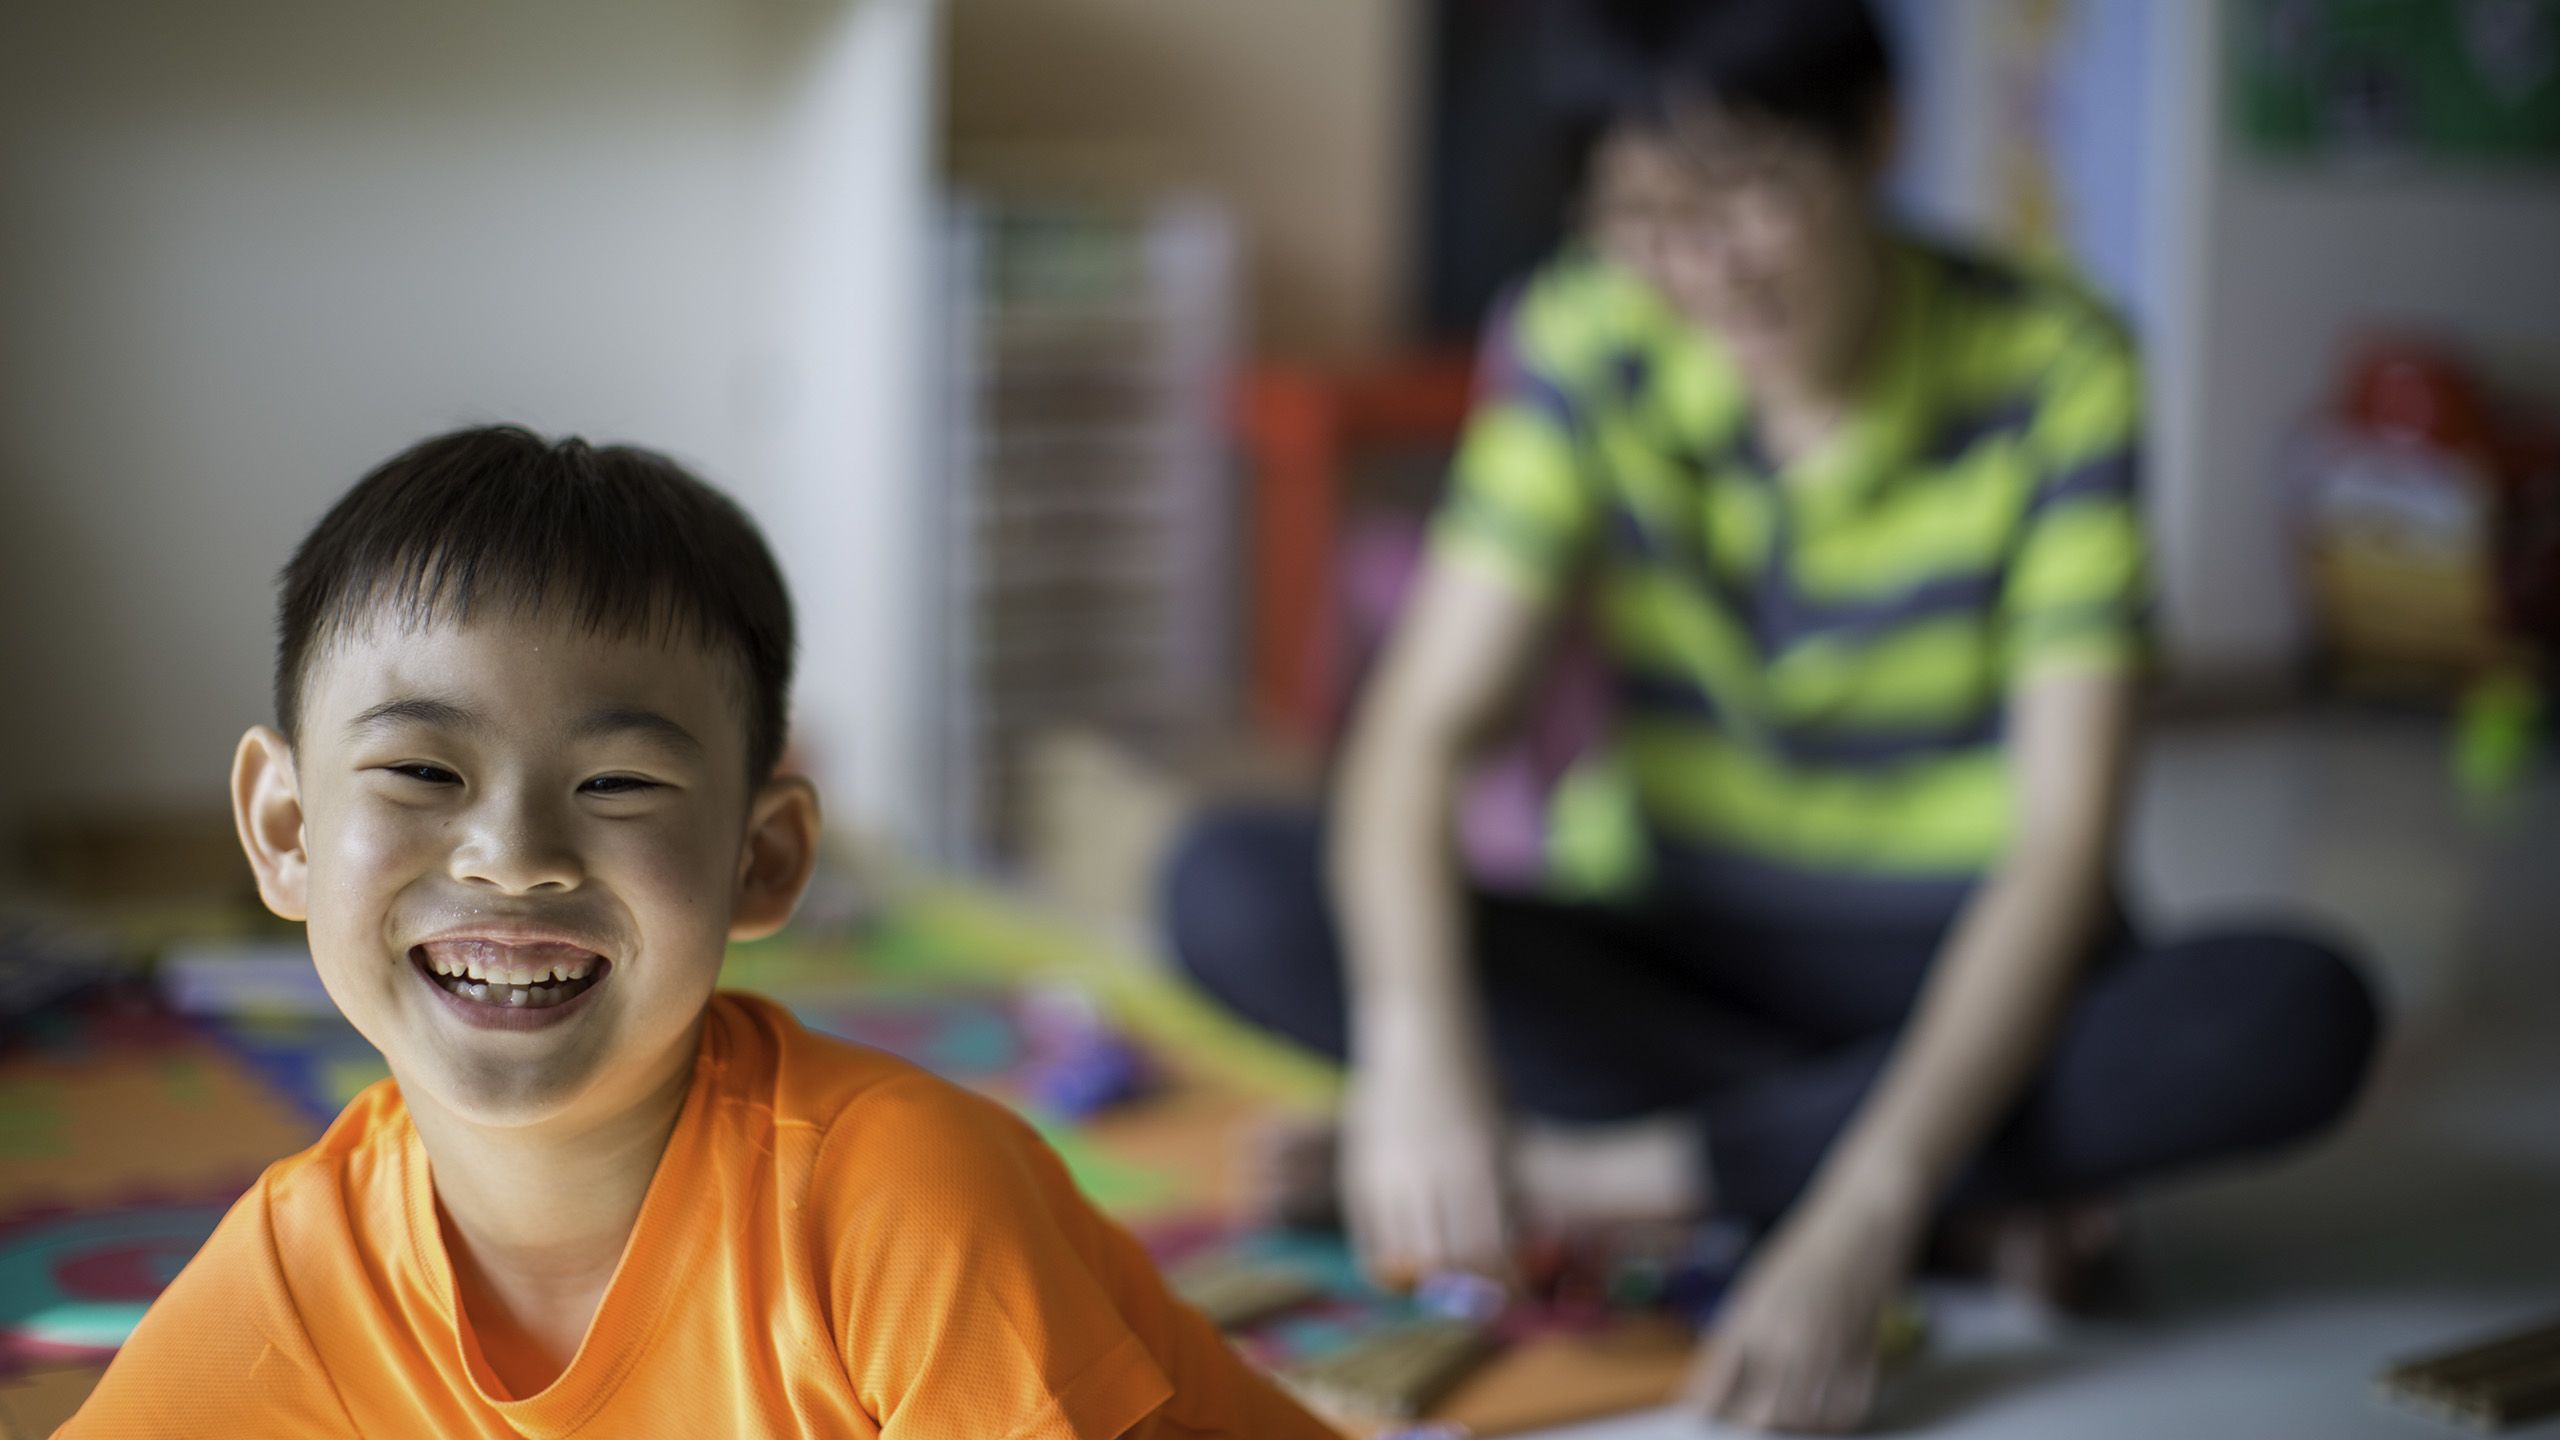 Jeston, a child with autism smiles at the camera.